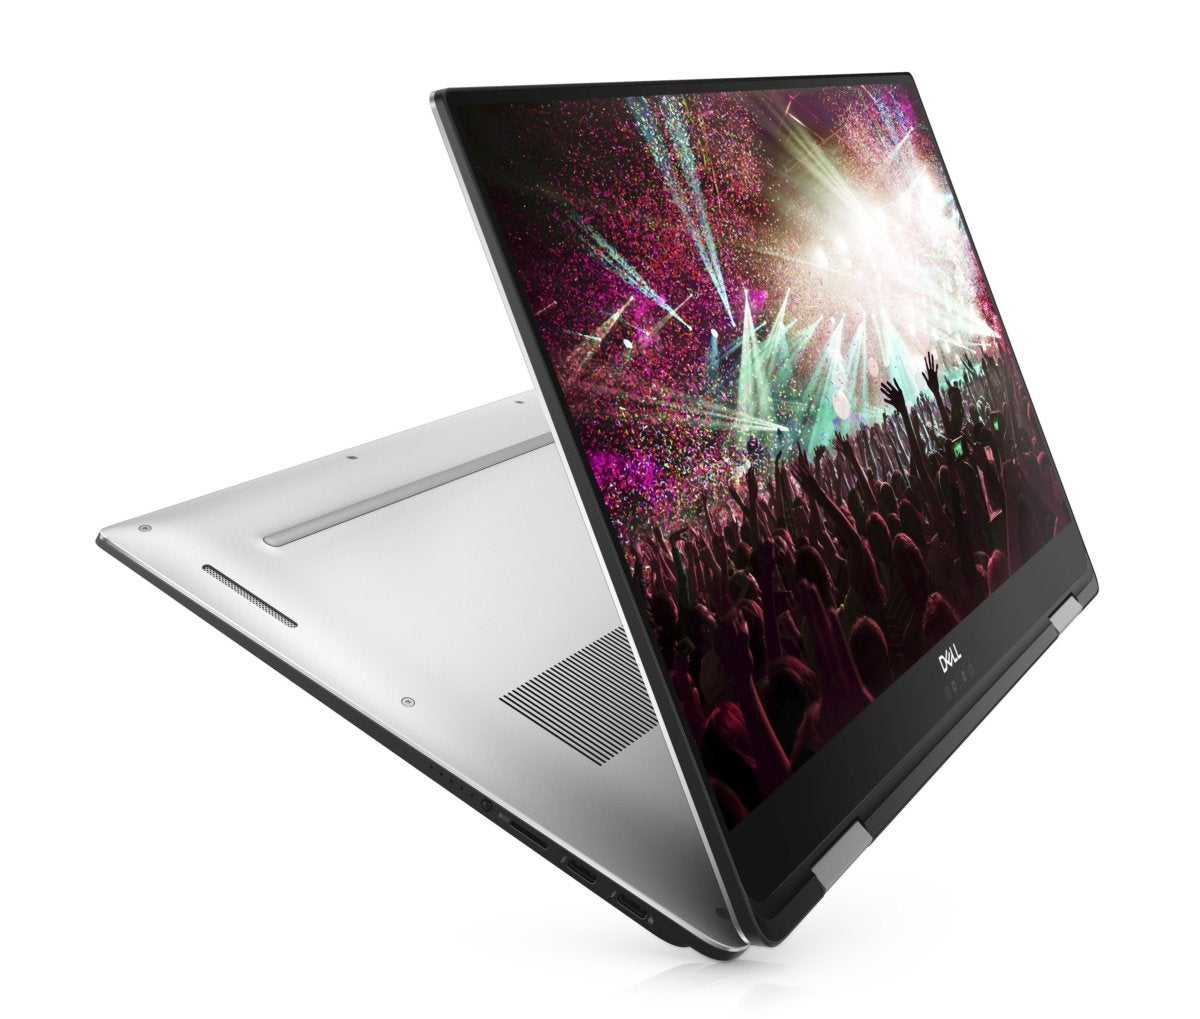 Dell XPS 15 2in1 specs, features, price, and release date PCWorld